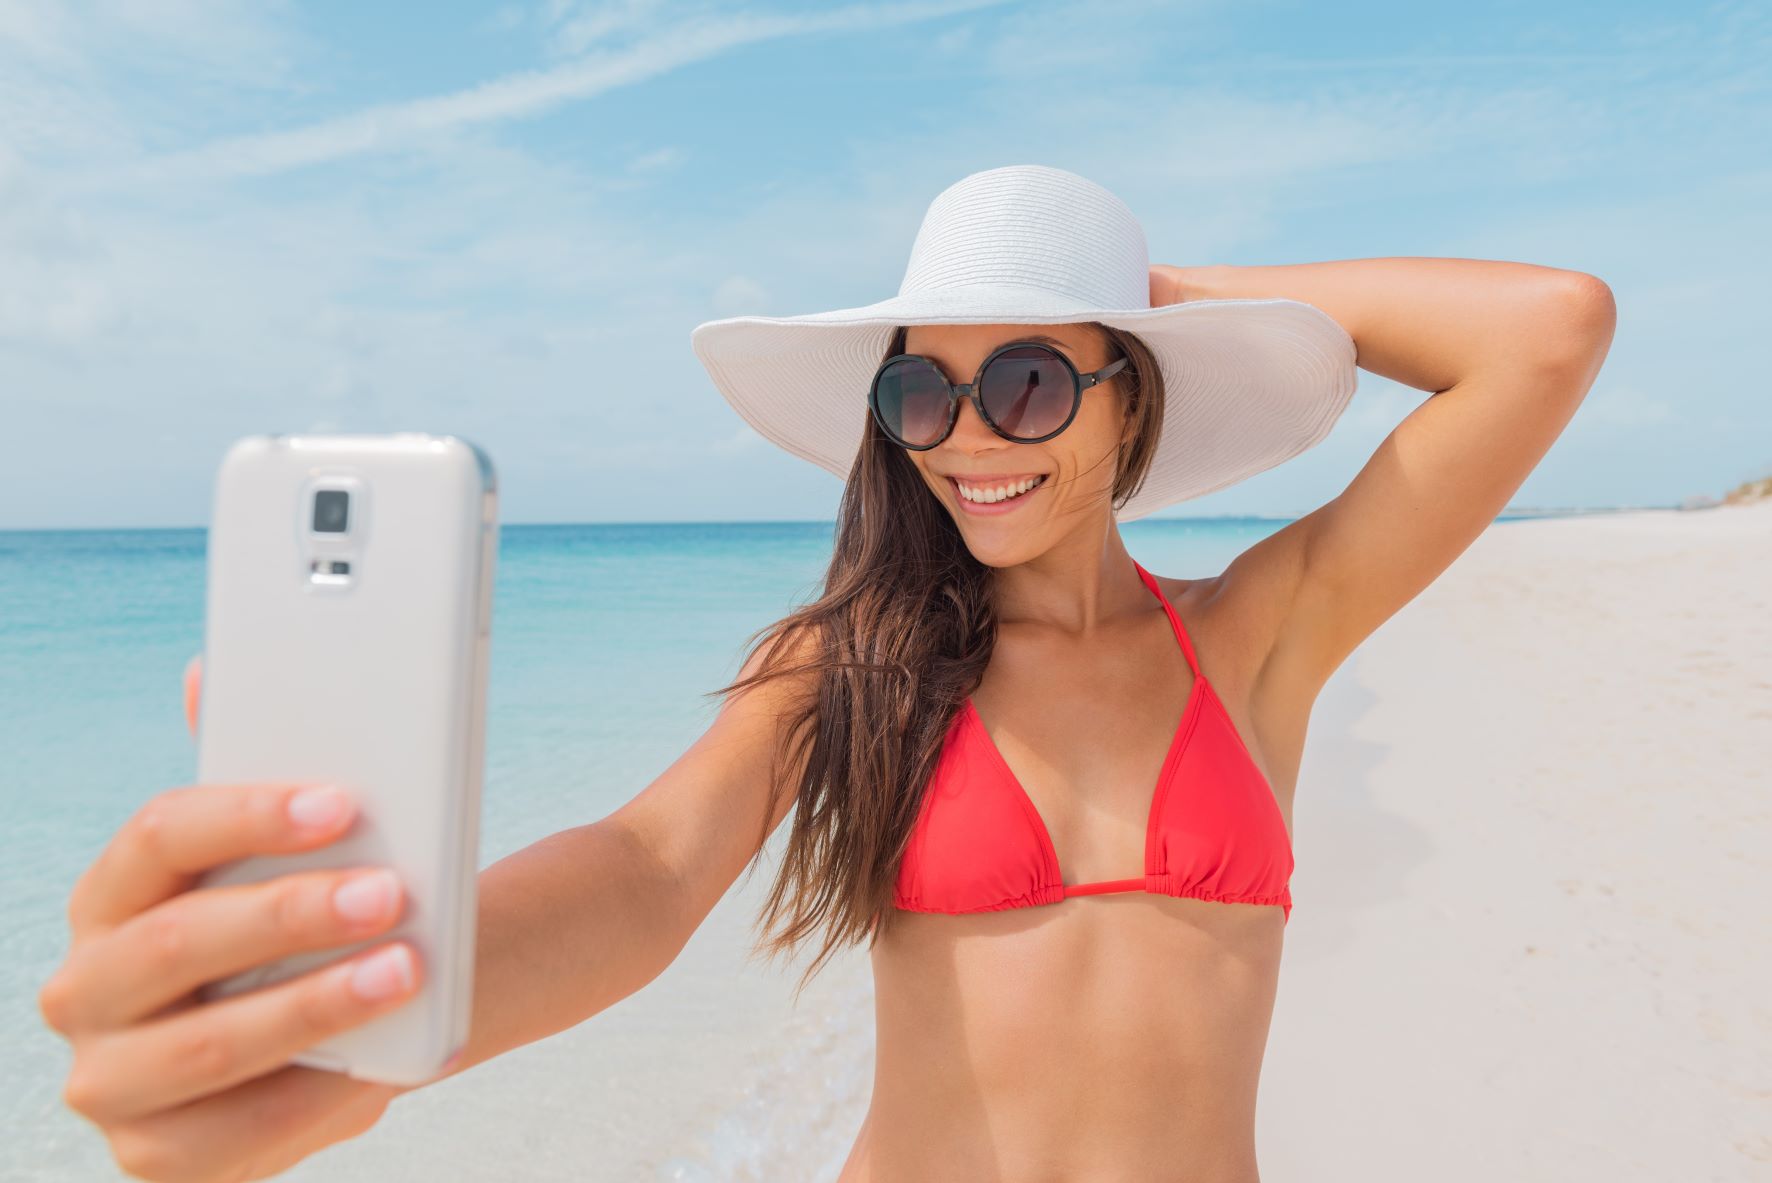 Young woman on a beach taking a selfie